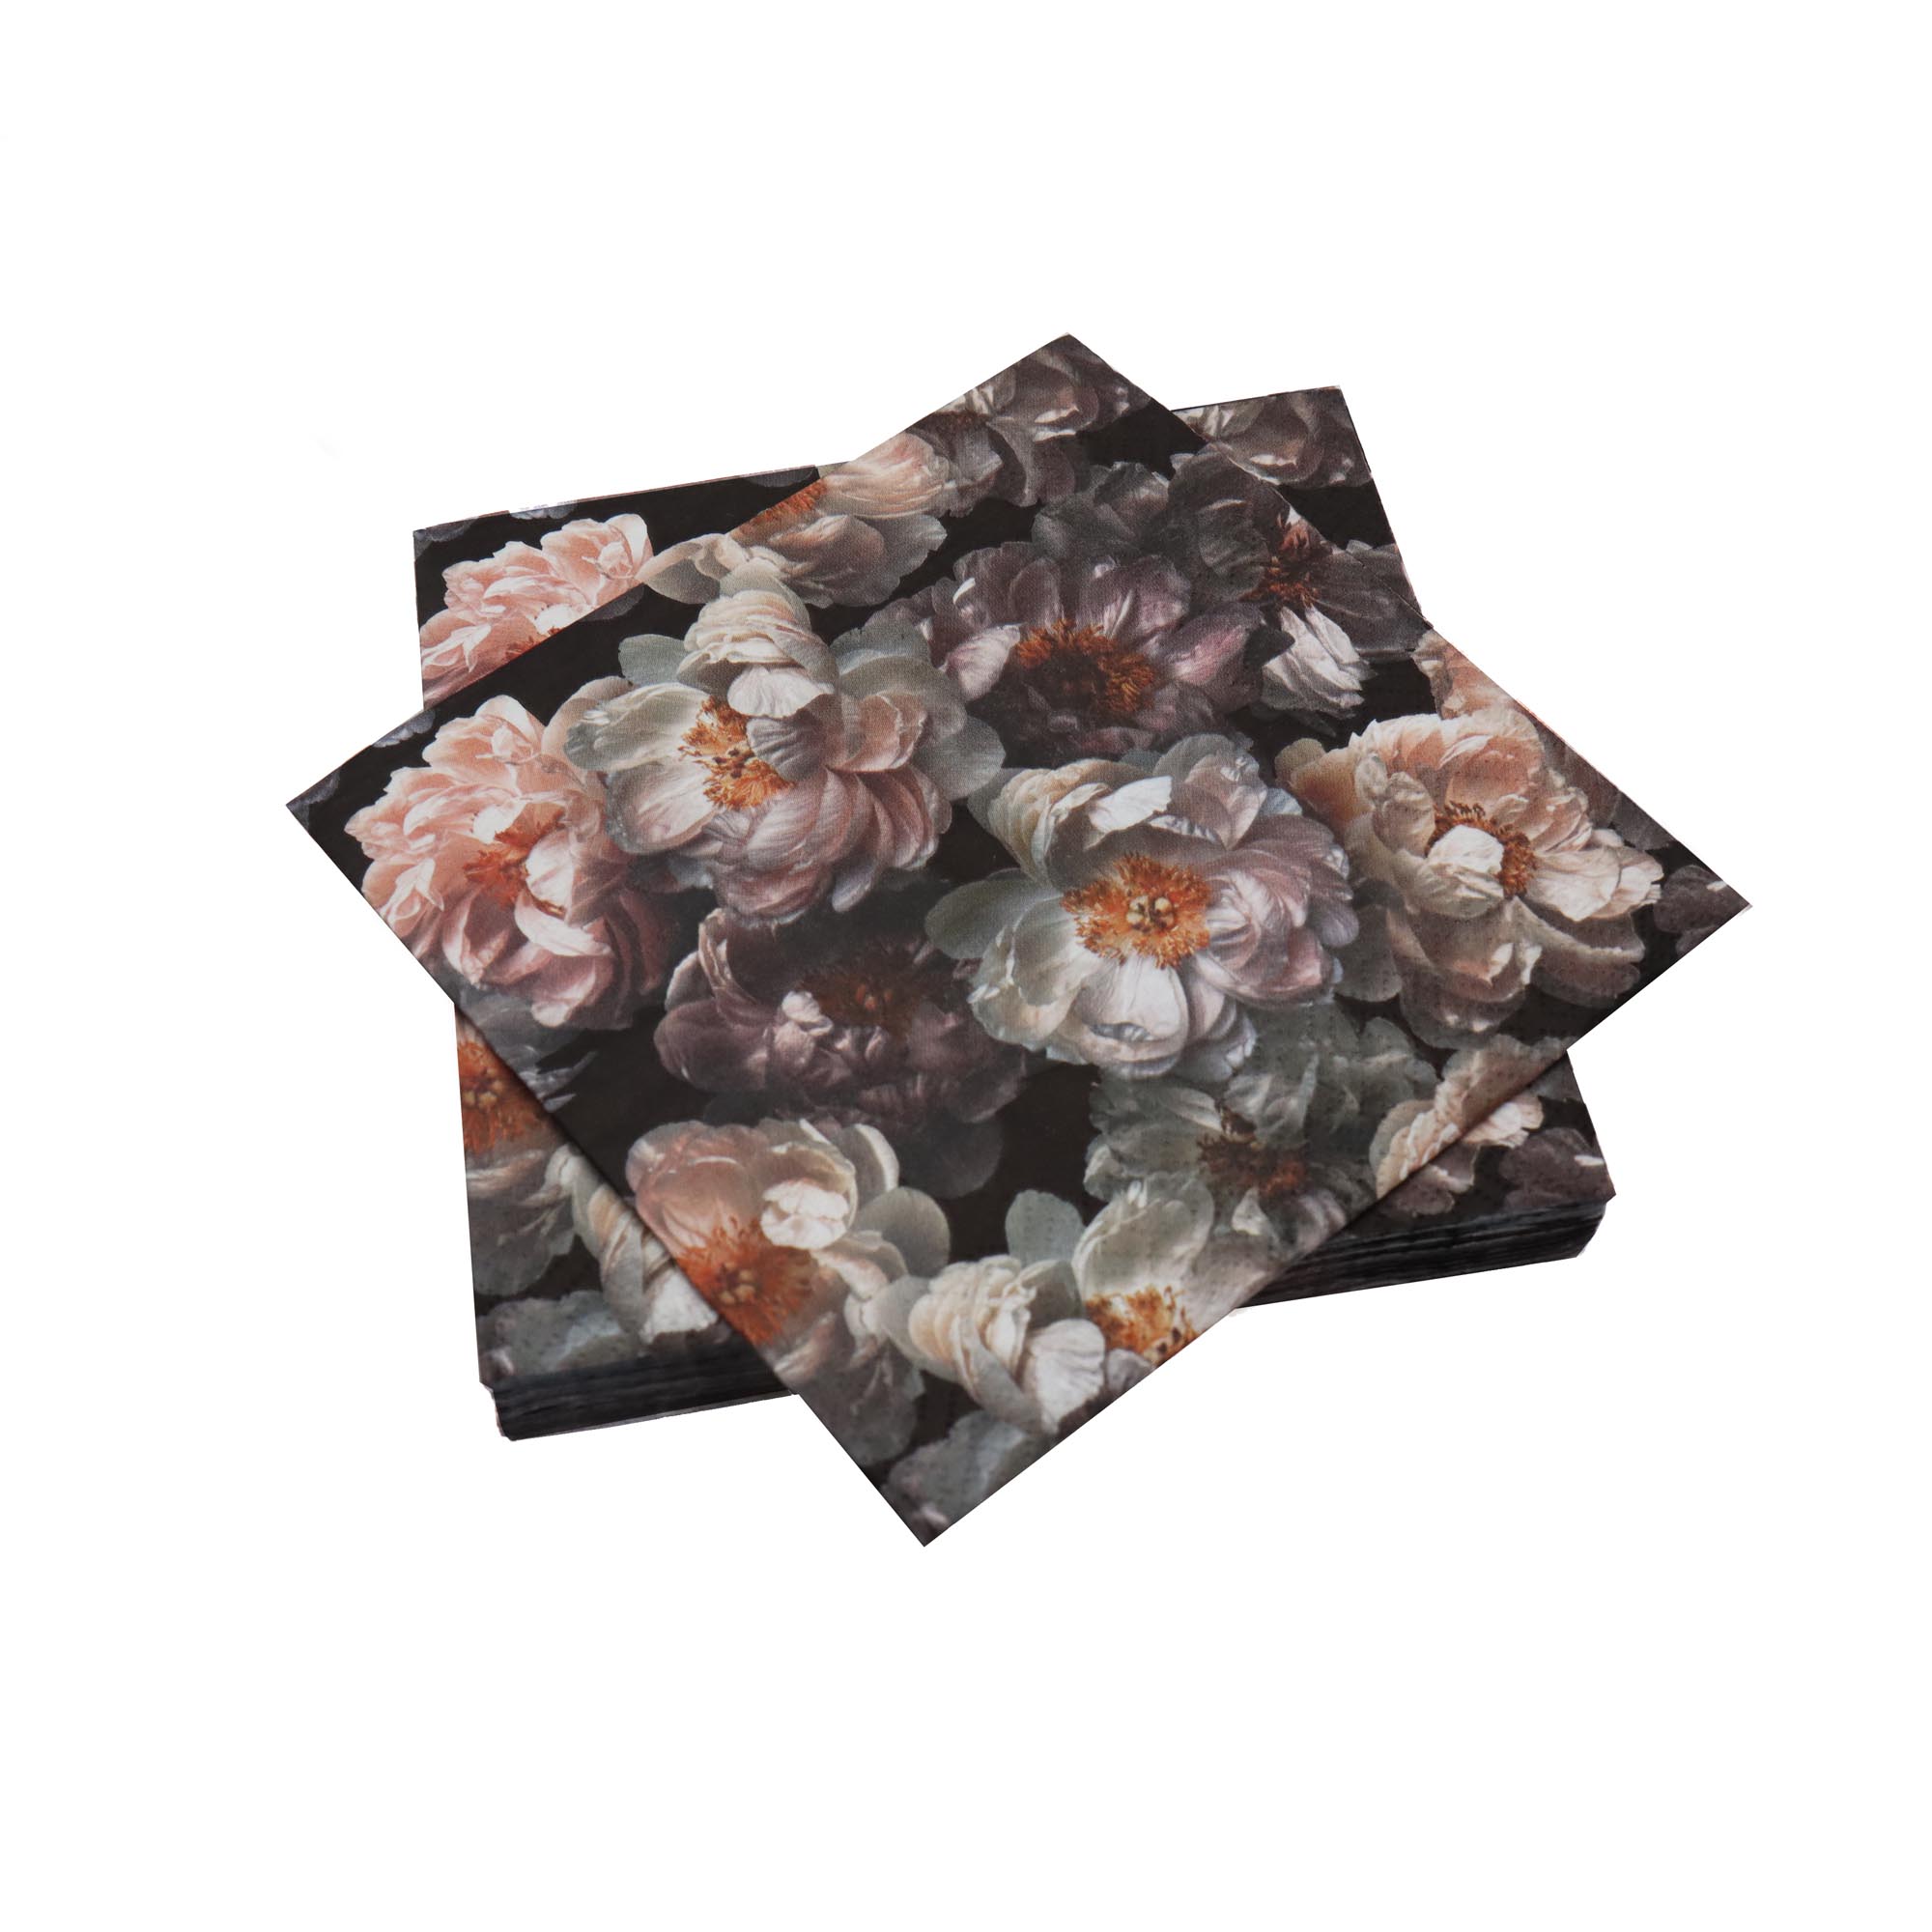 Luncheon Table Serviettes 3ply 33x33cm Dark Floral 20pack